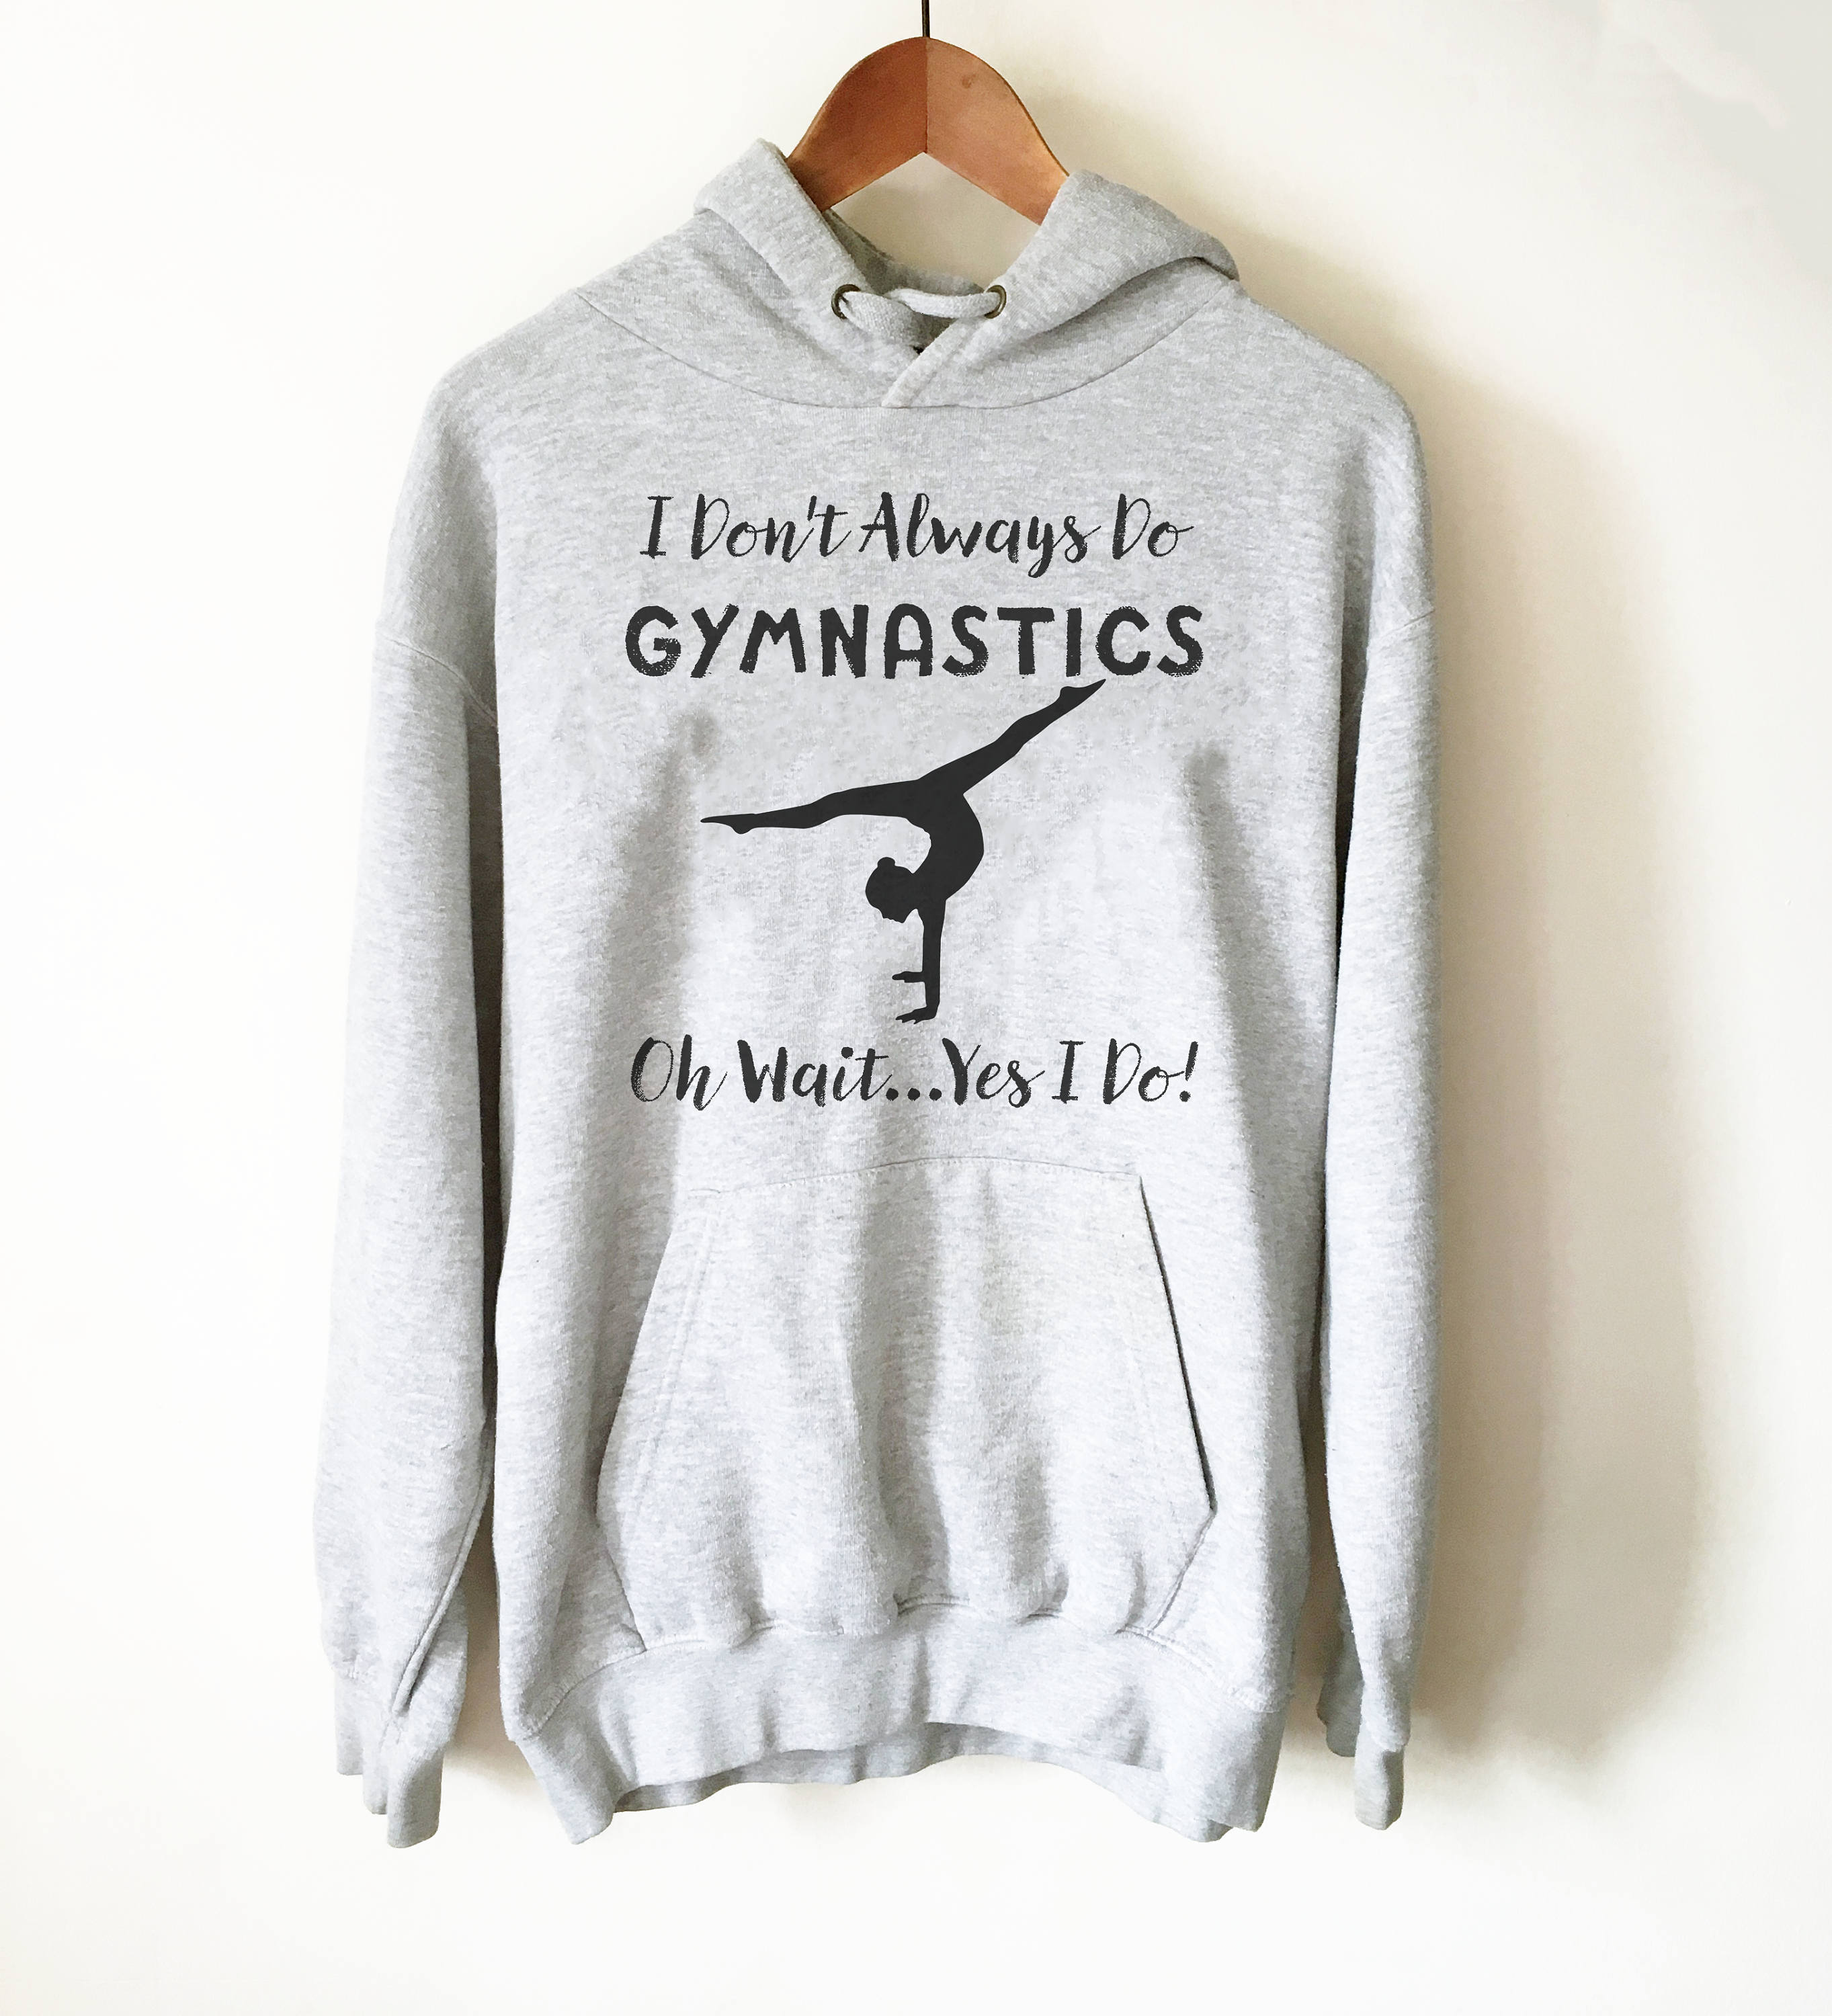 Statement Sweater for The Dedicated Gymnast 